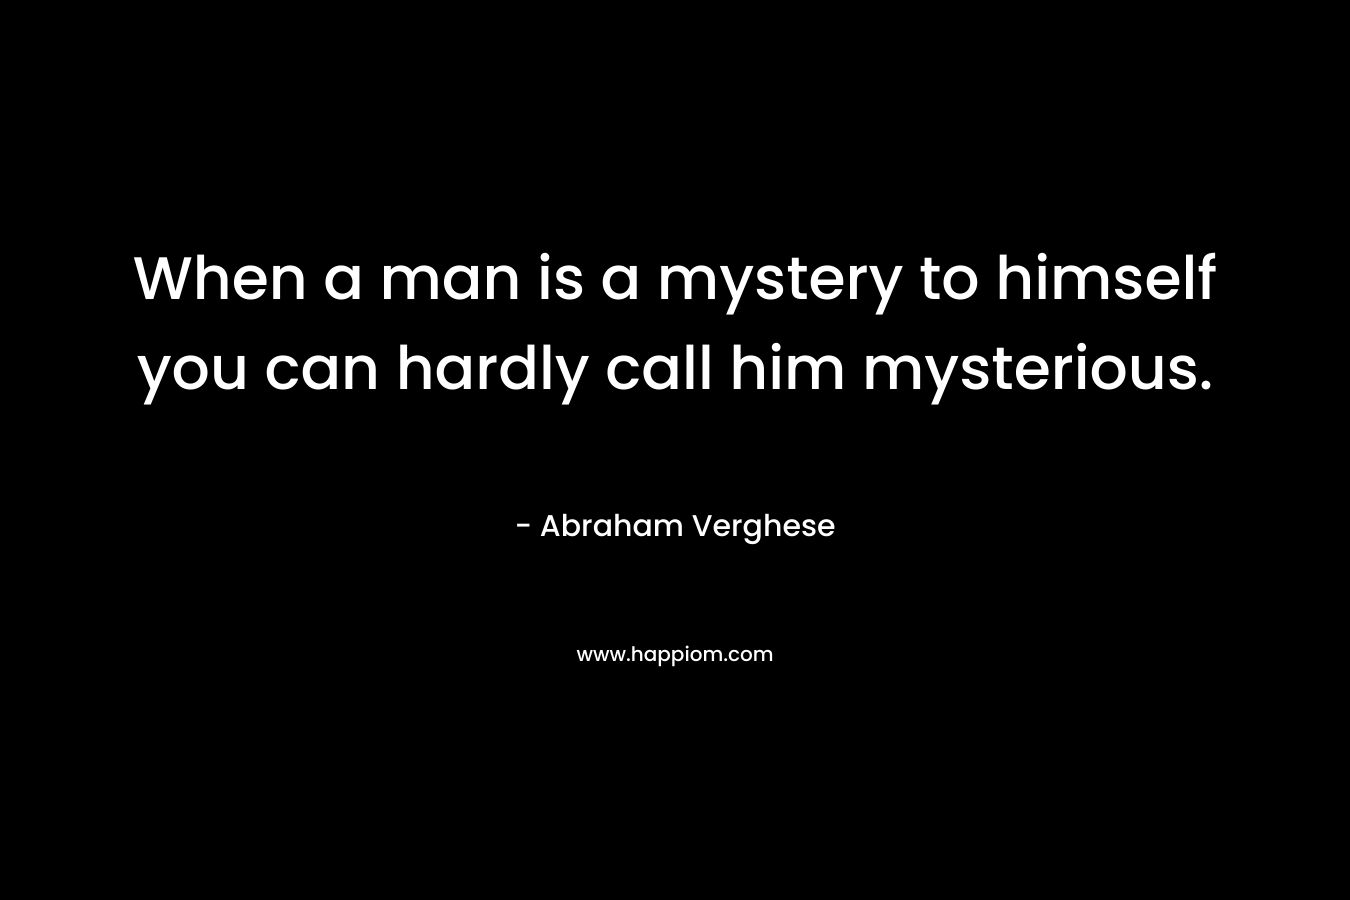 When a man is a mystery to himself you can hardly call him mysterious.